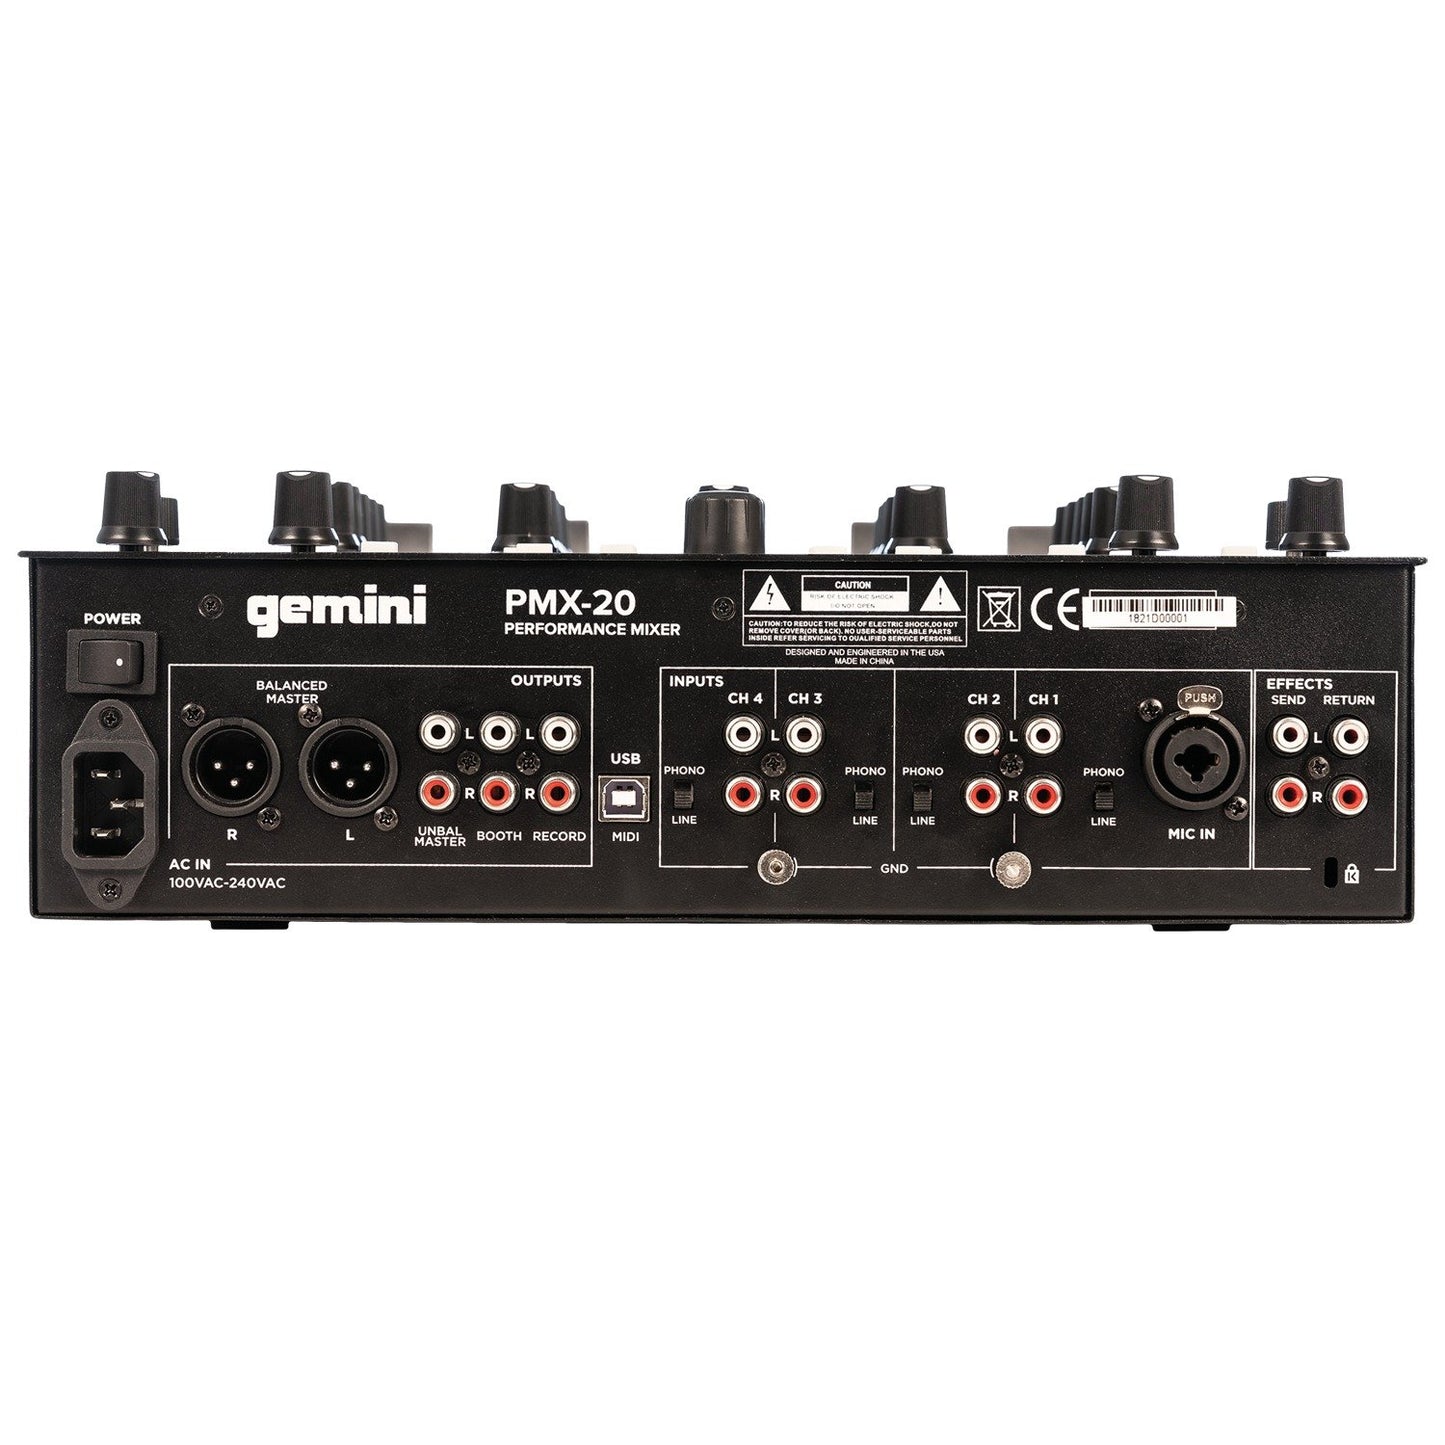 Gemini PMX-20 4-Channel Mixer and Controller